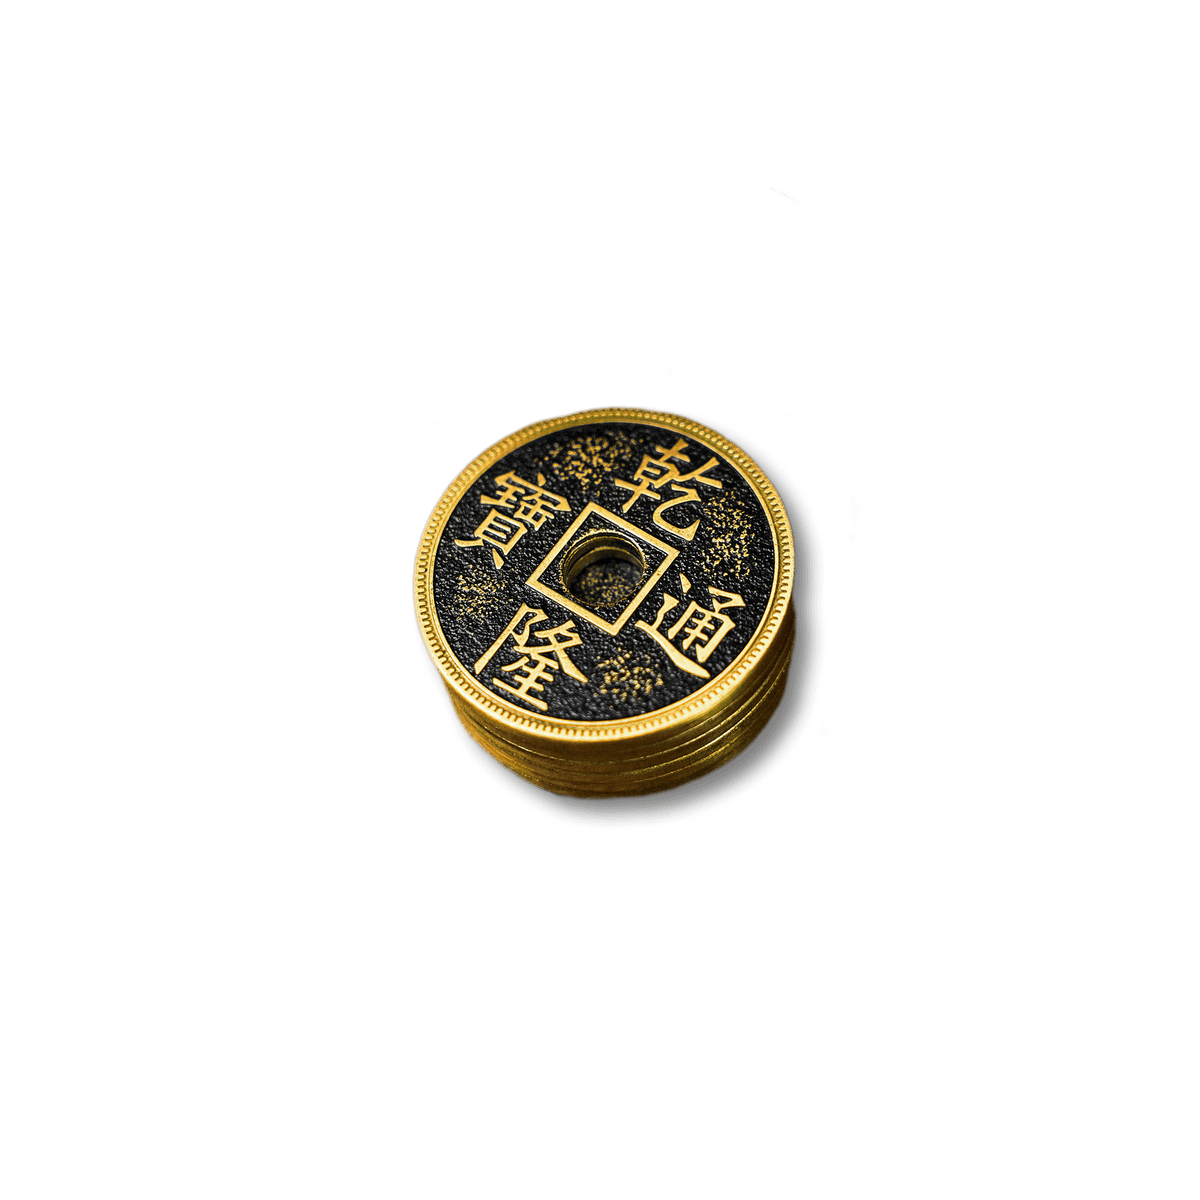 Crazy Chinese Coins by Artisan Coin & Jimmy Fan – TCC Magic